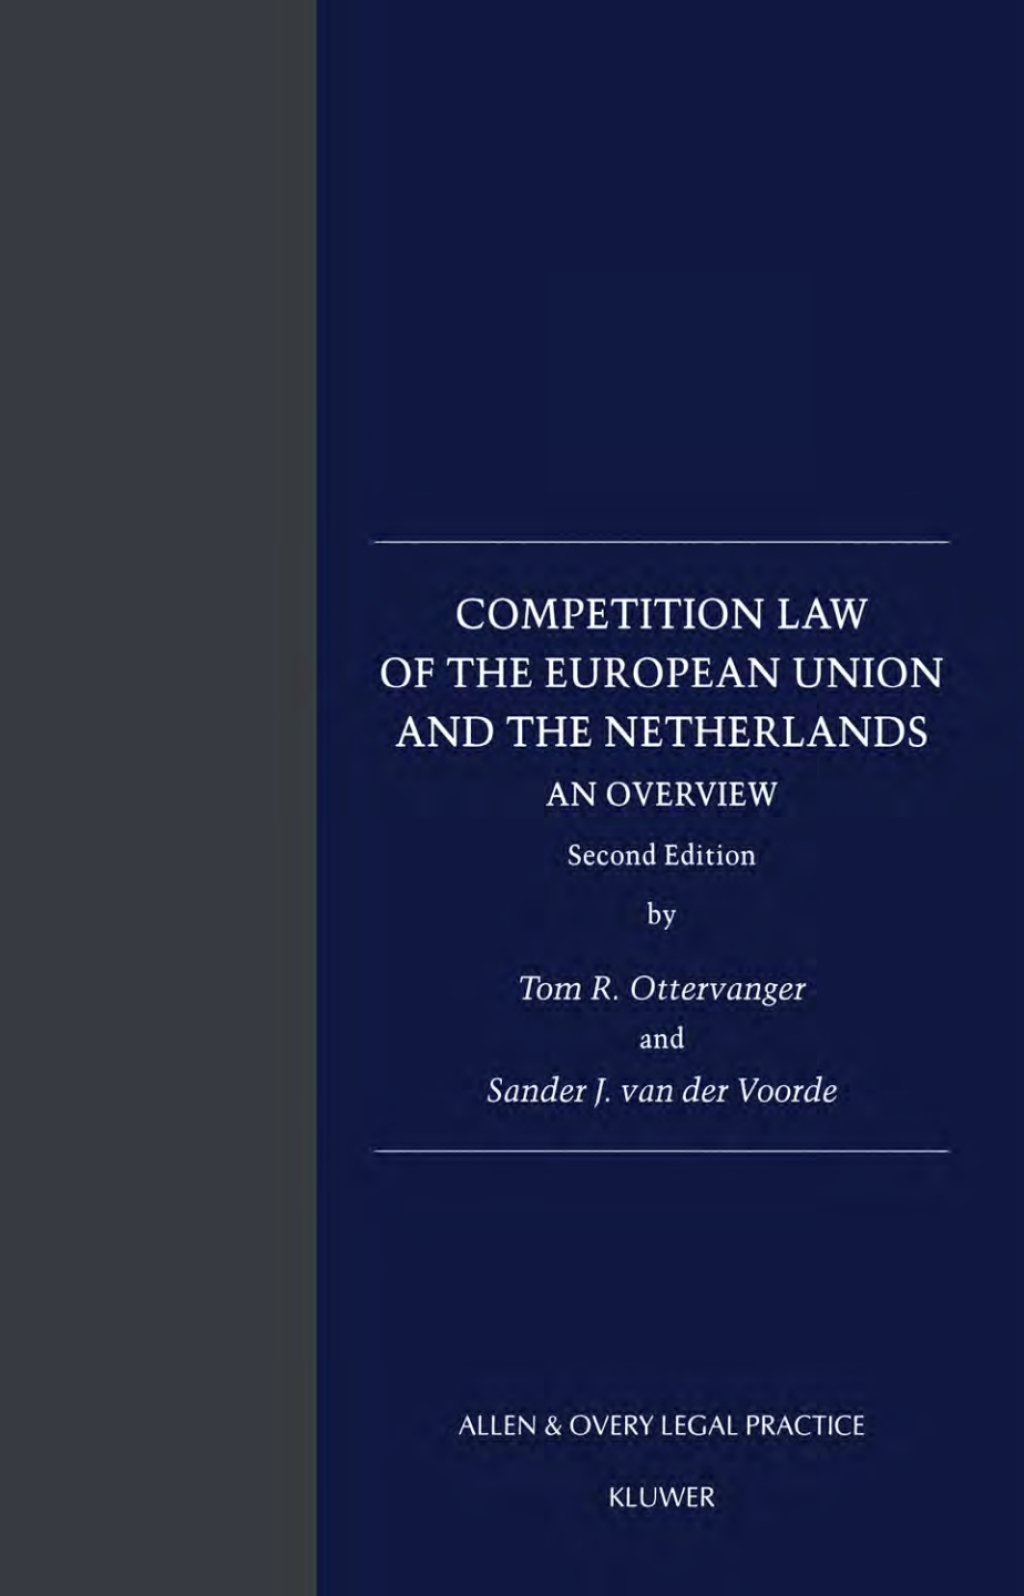 Competition Law of the European Union and the Netherlands: An Overview - 2nd Edition (eBook Rental)